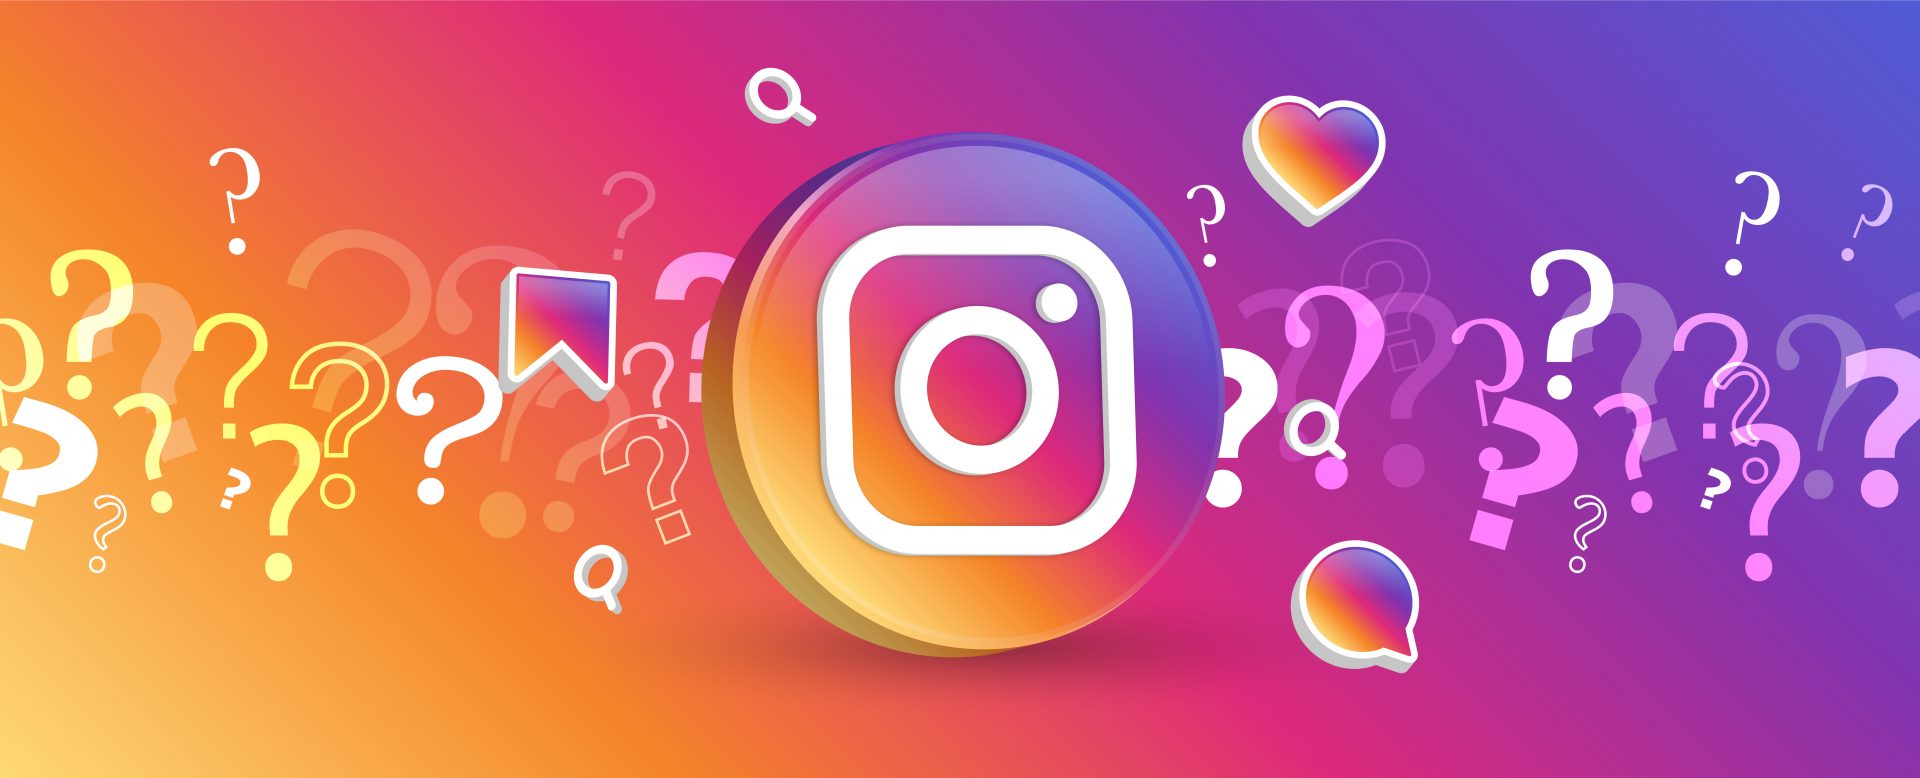 Are you for or against the changes to Instagram? image